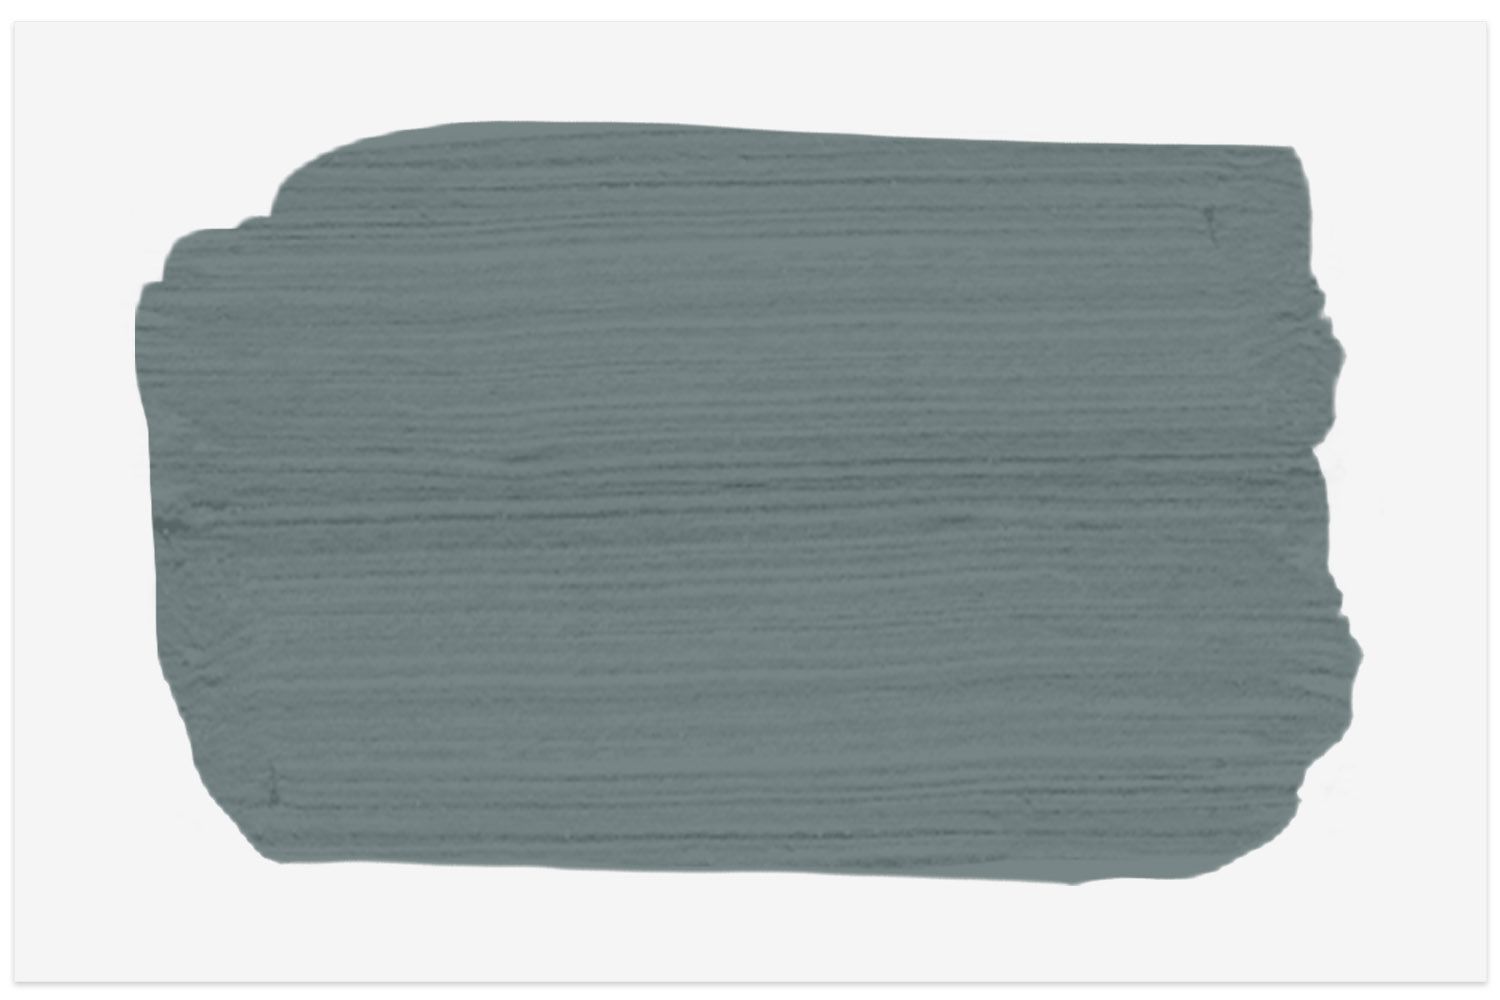 Templeton Gray HC-161 paint swatch from Benjamin Moore